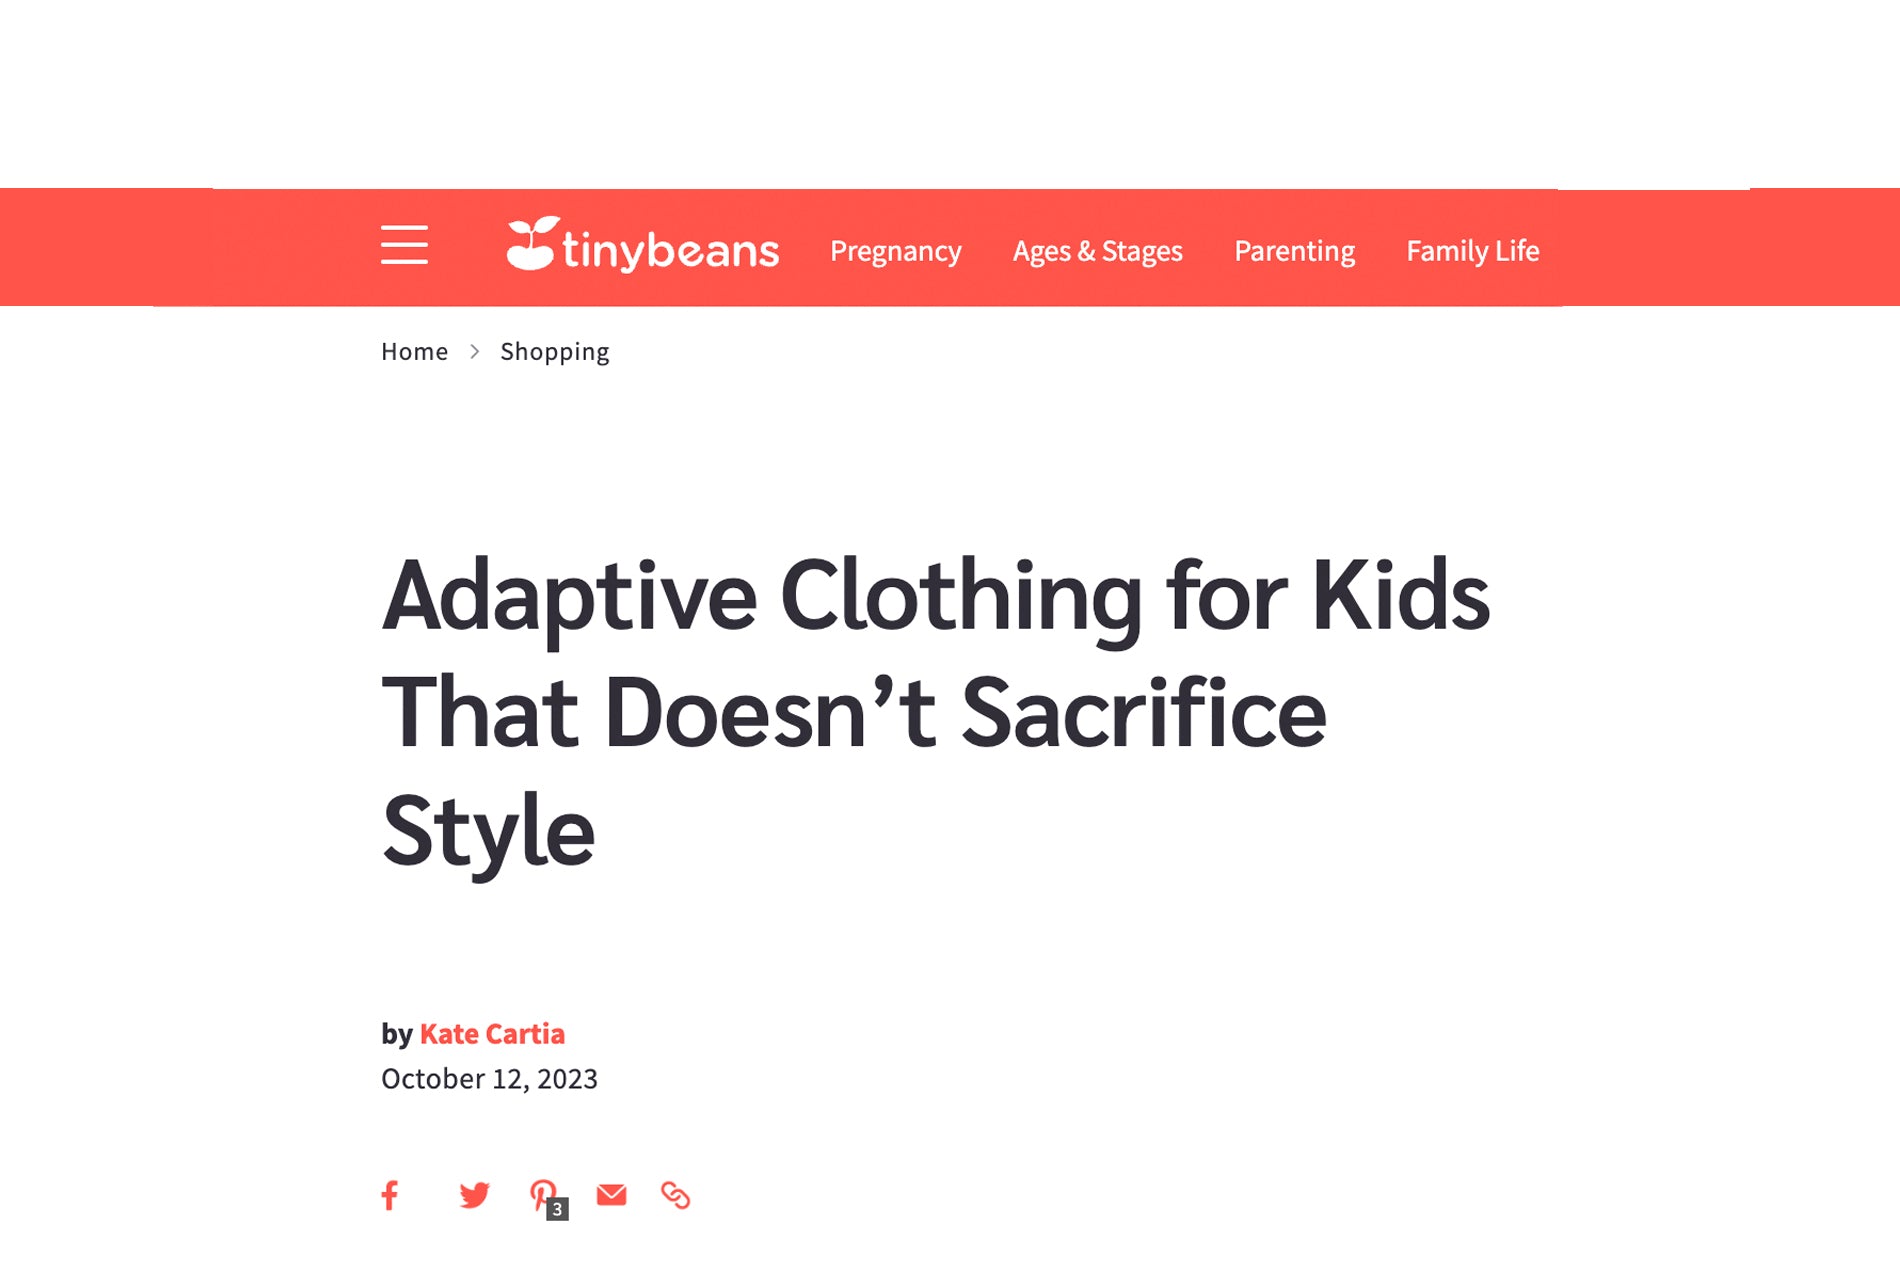 Adaptive Clothing for Kids That Doesn't Sacrifice Style